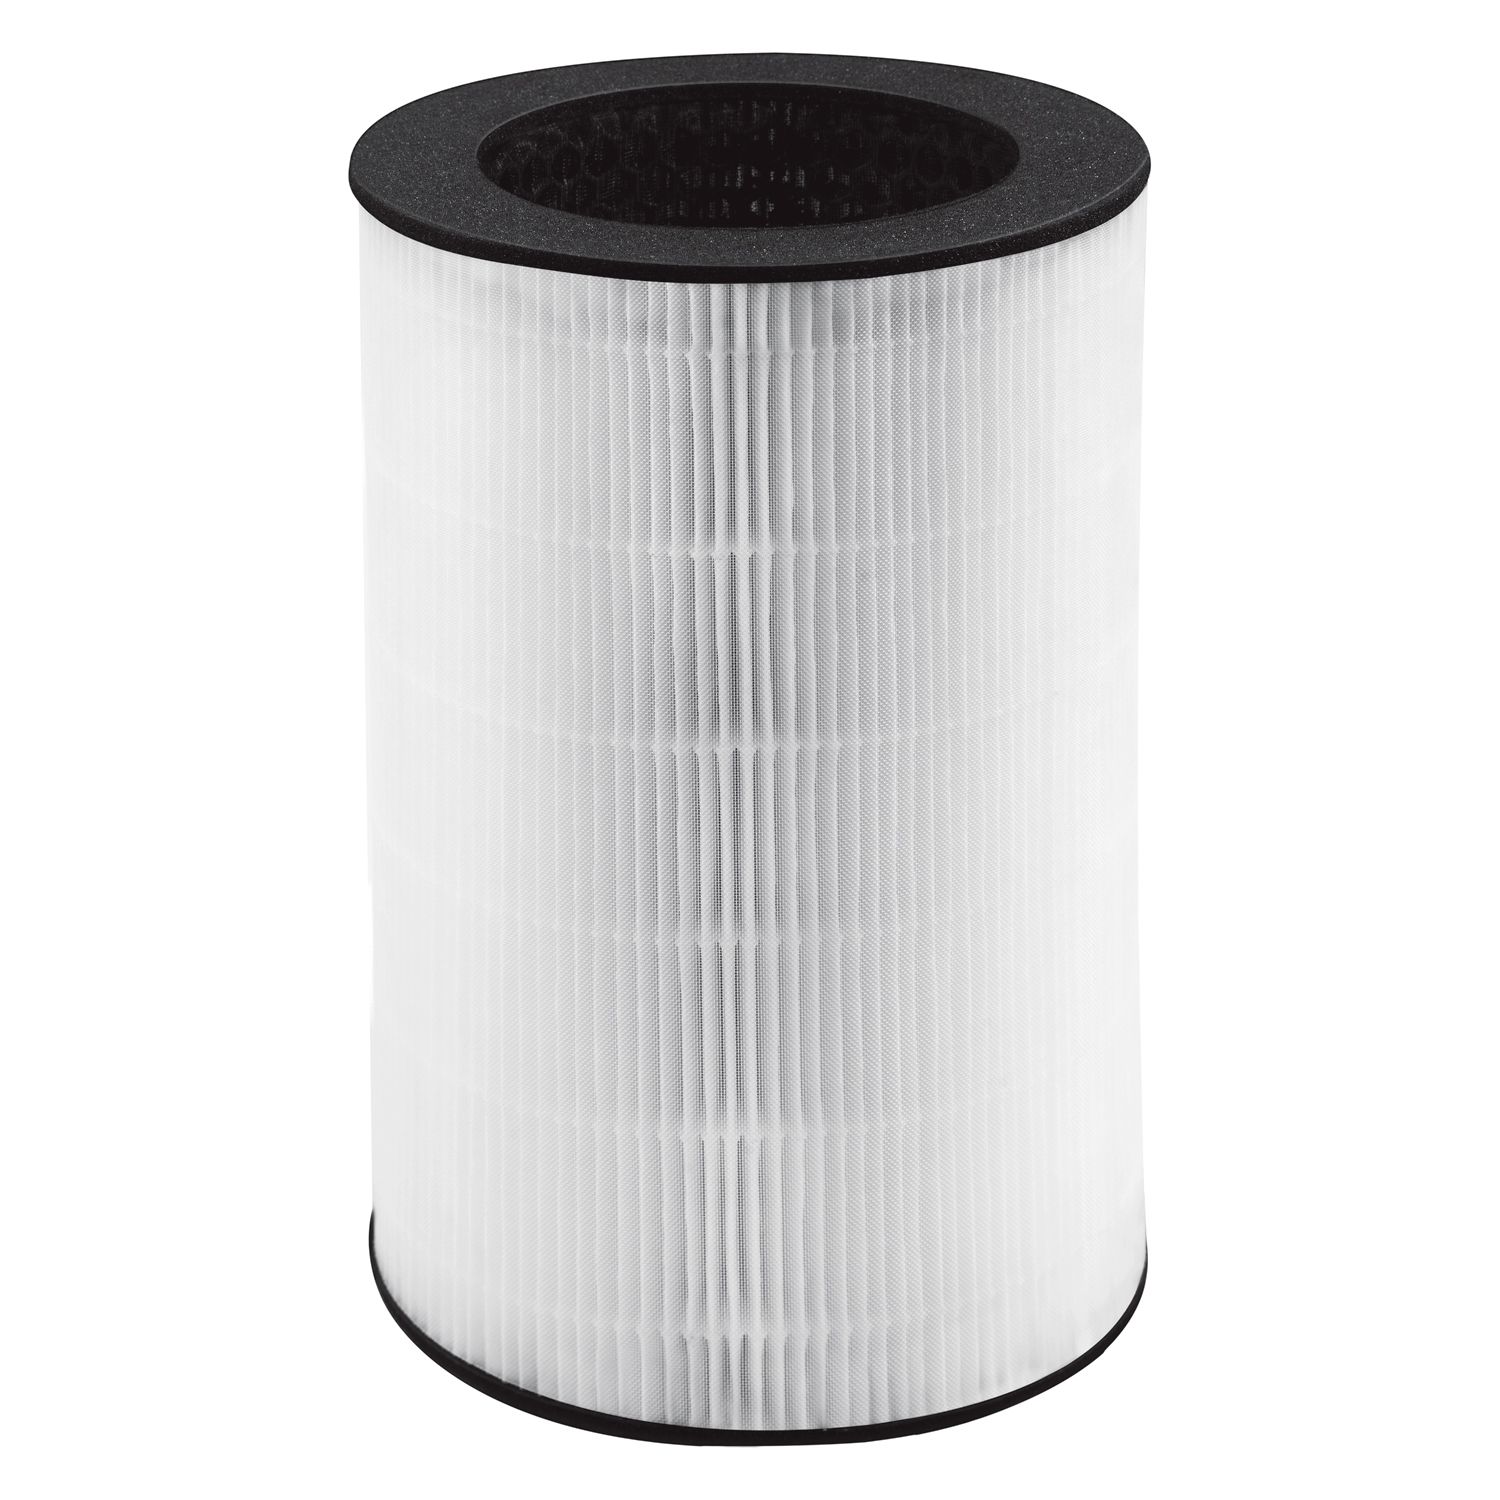 Image for HoMedics TotalClean Deluxe Replacement True Hepa Filter at Kohl's.